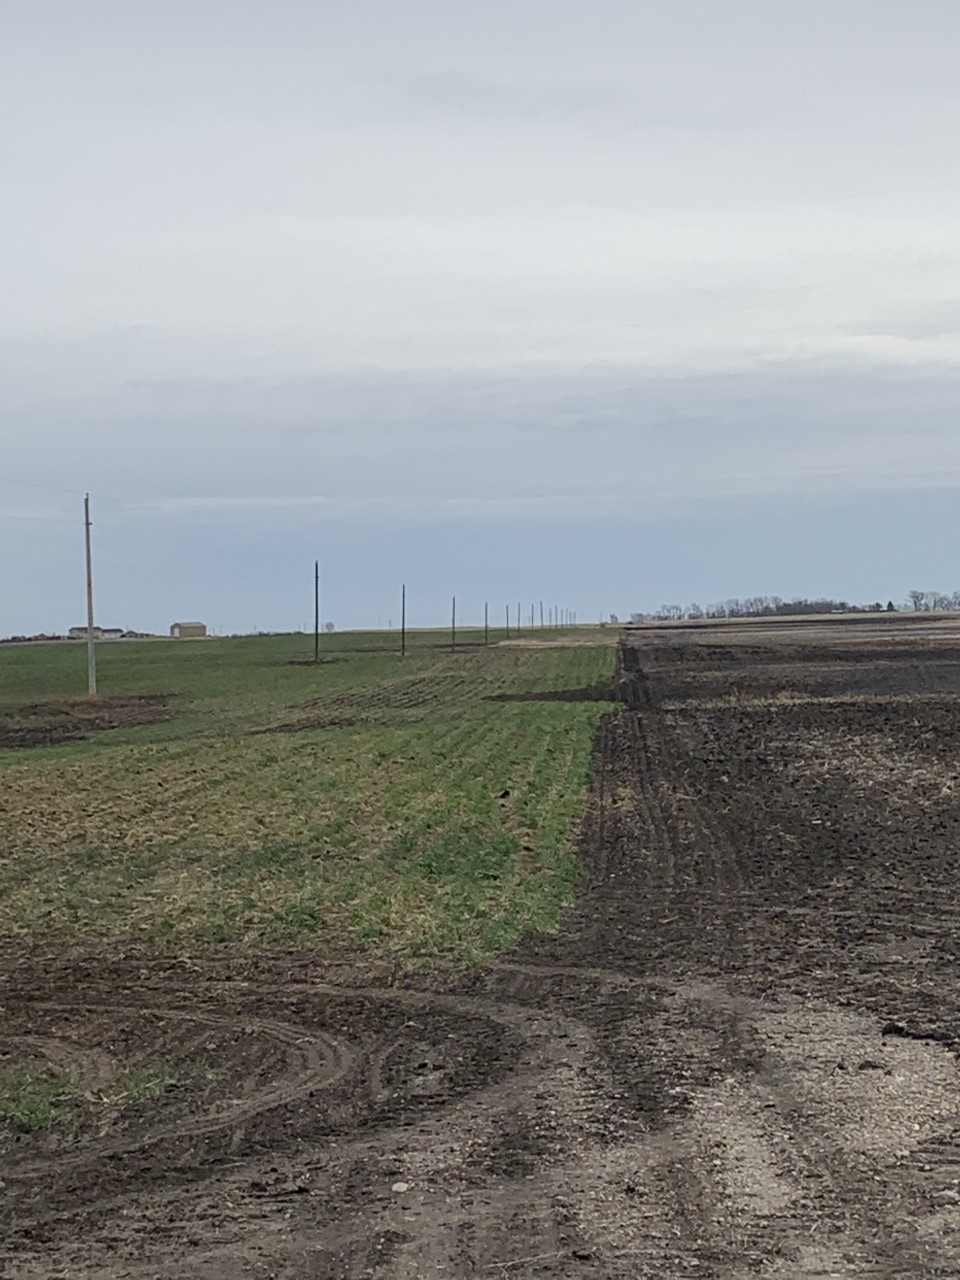 Afternoon Ag News, May 5, 2021: Areas of central North Dakota are in need of rain